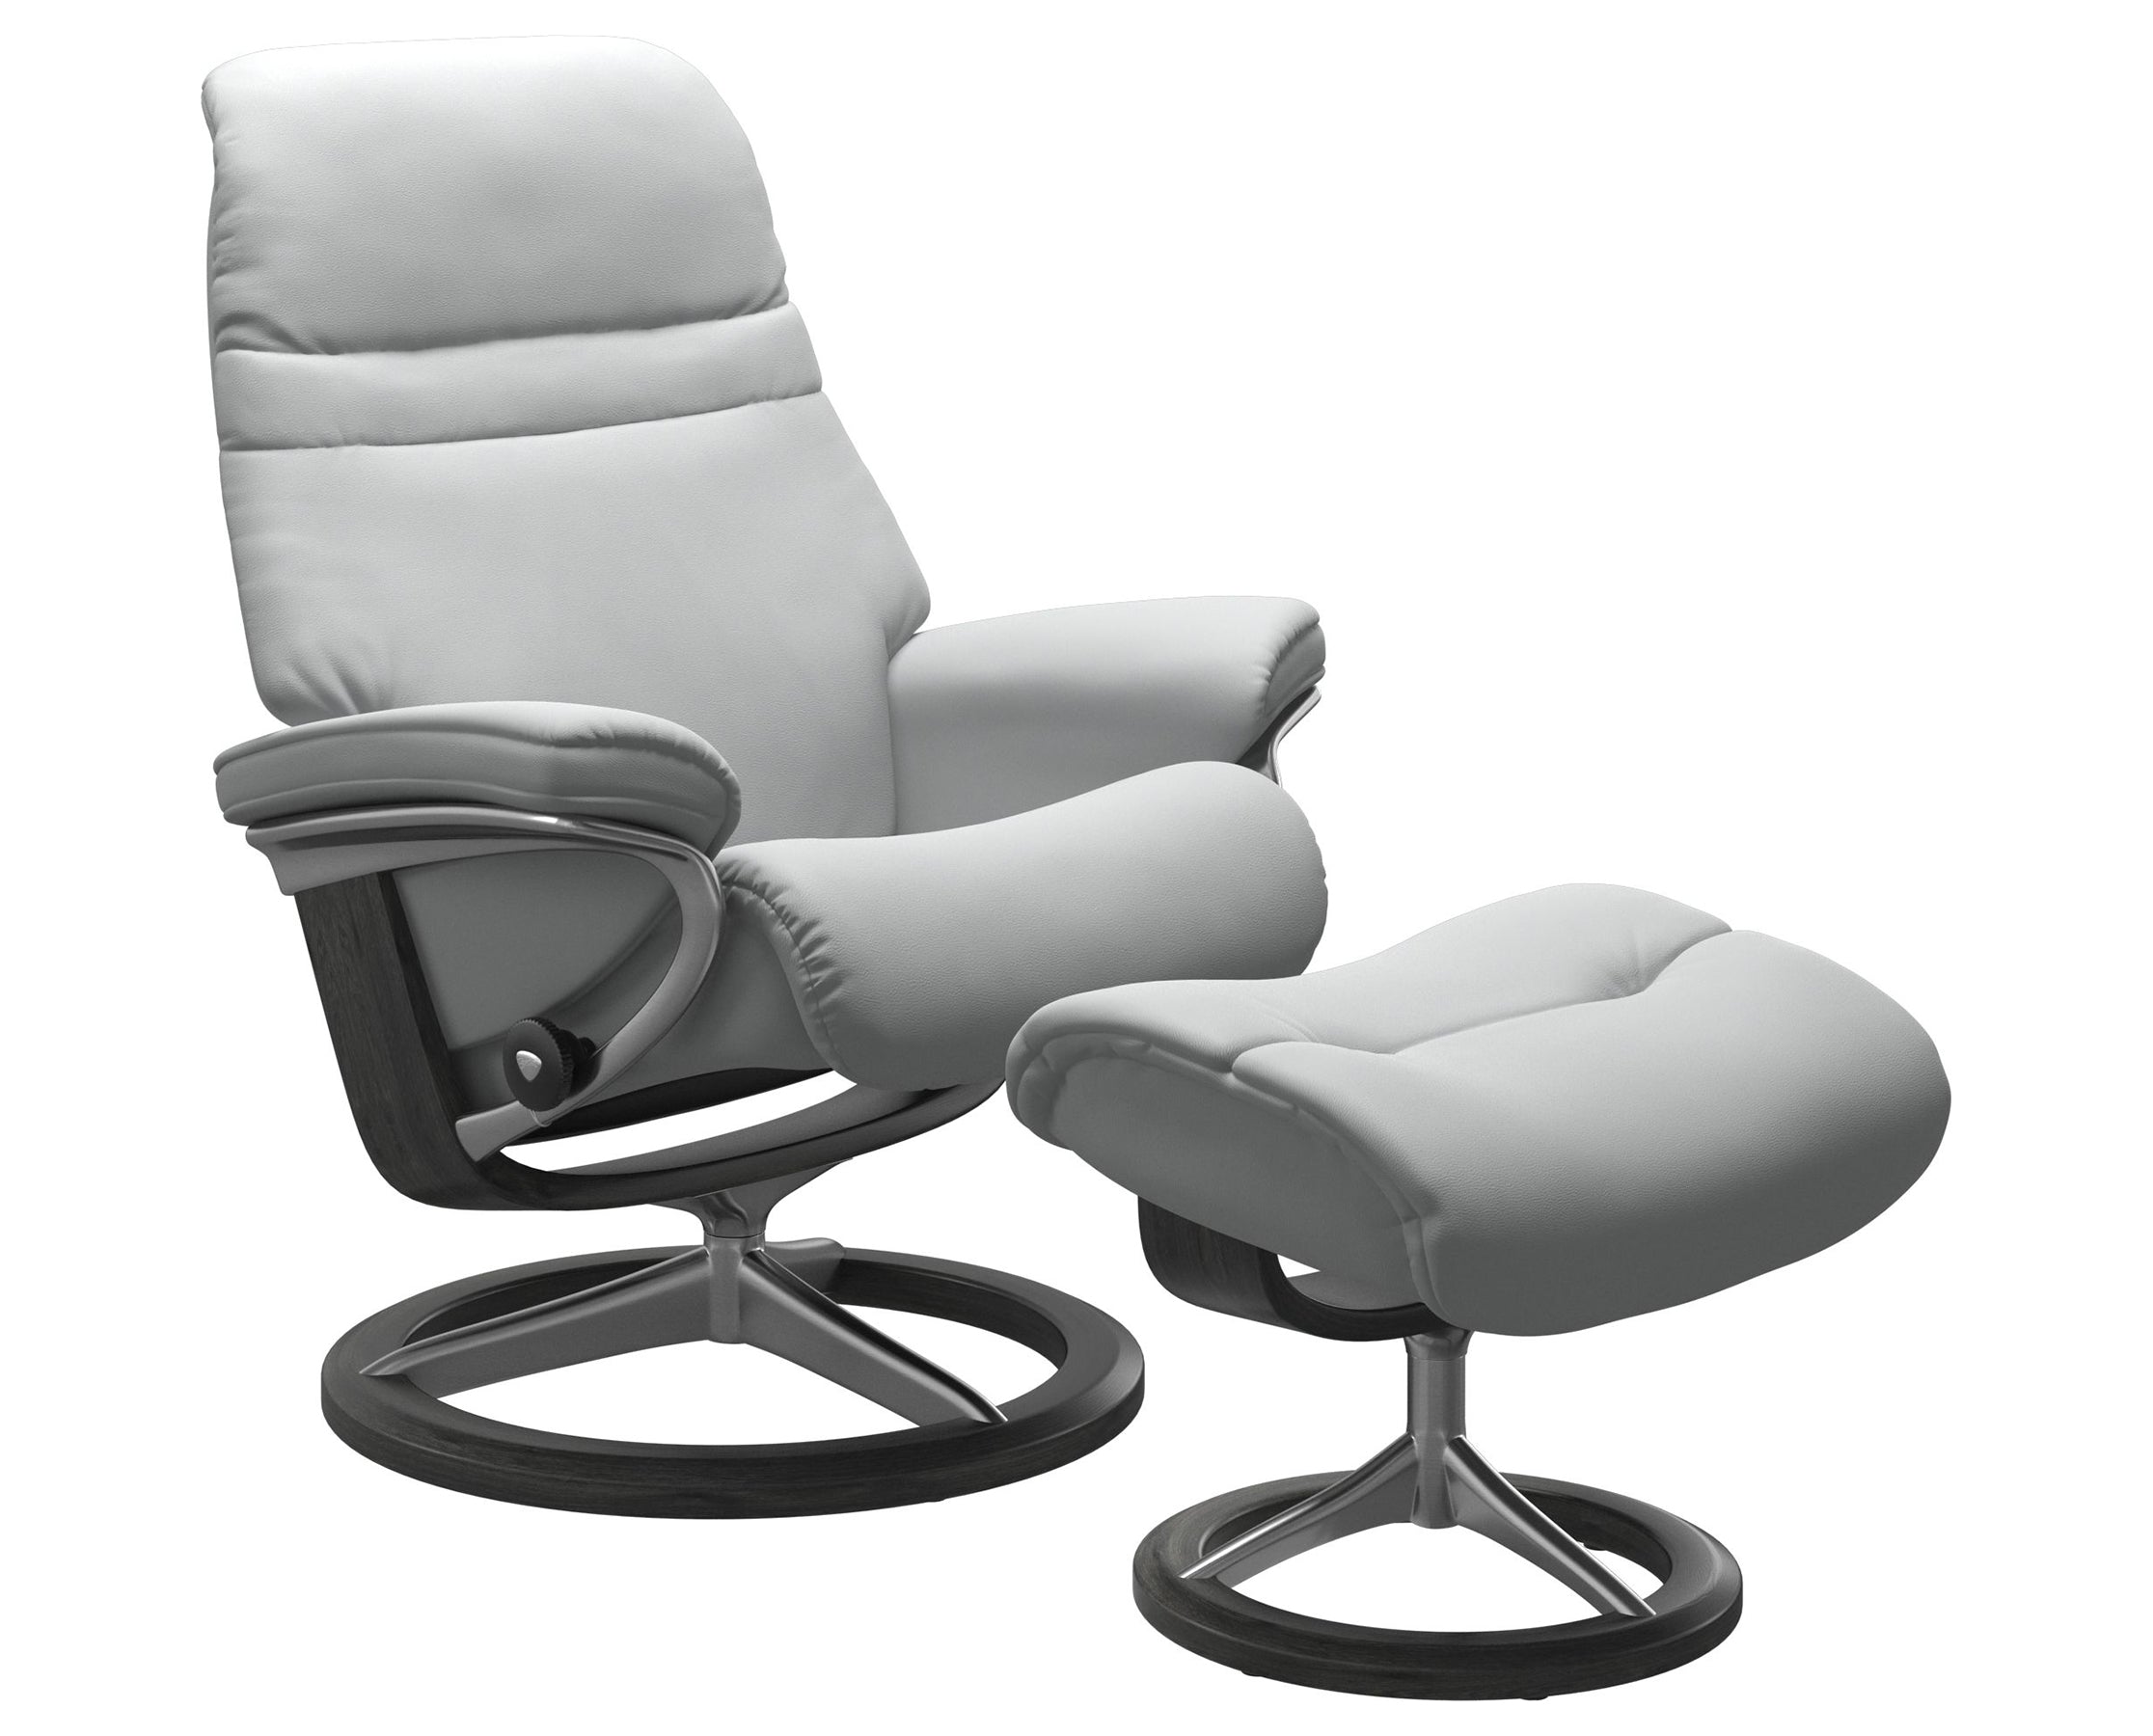 Paloma Leather Misty Grey S/M/L and Grey Base | Stressless Sunrise Signature Recliner | Valley Ridge Furniture